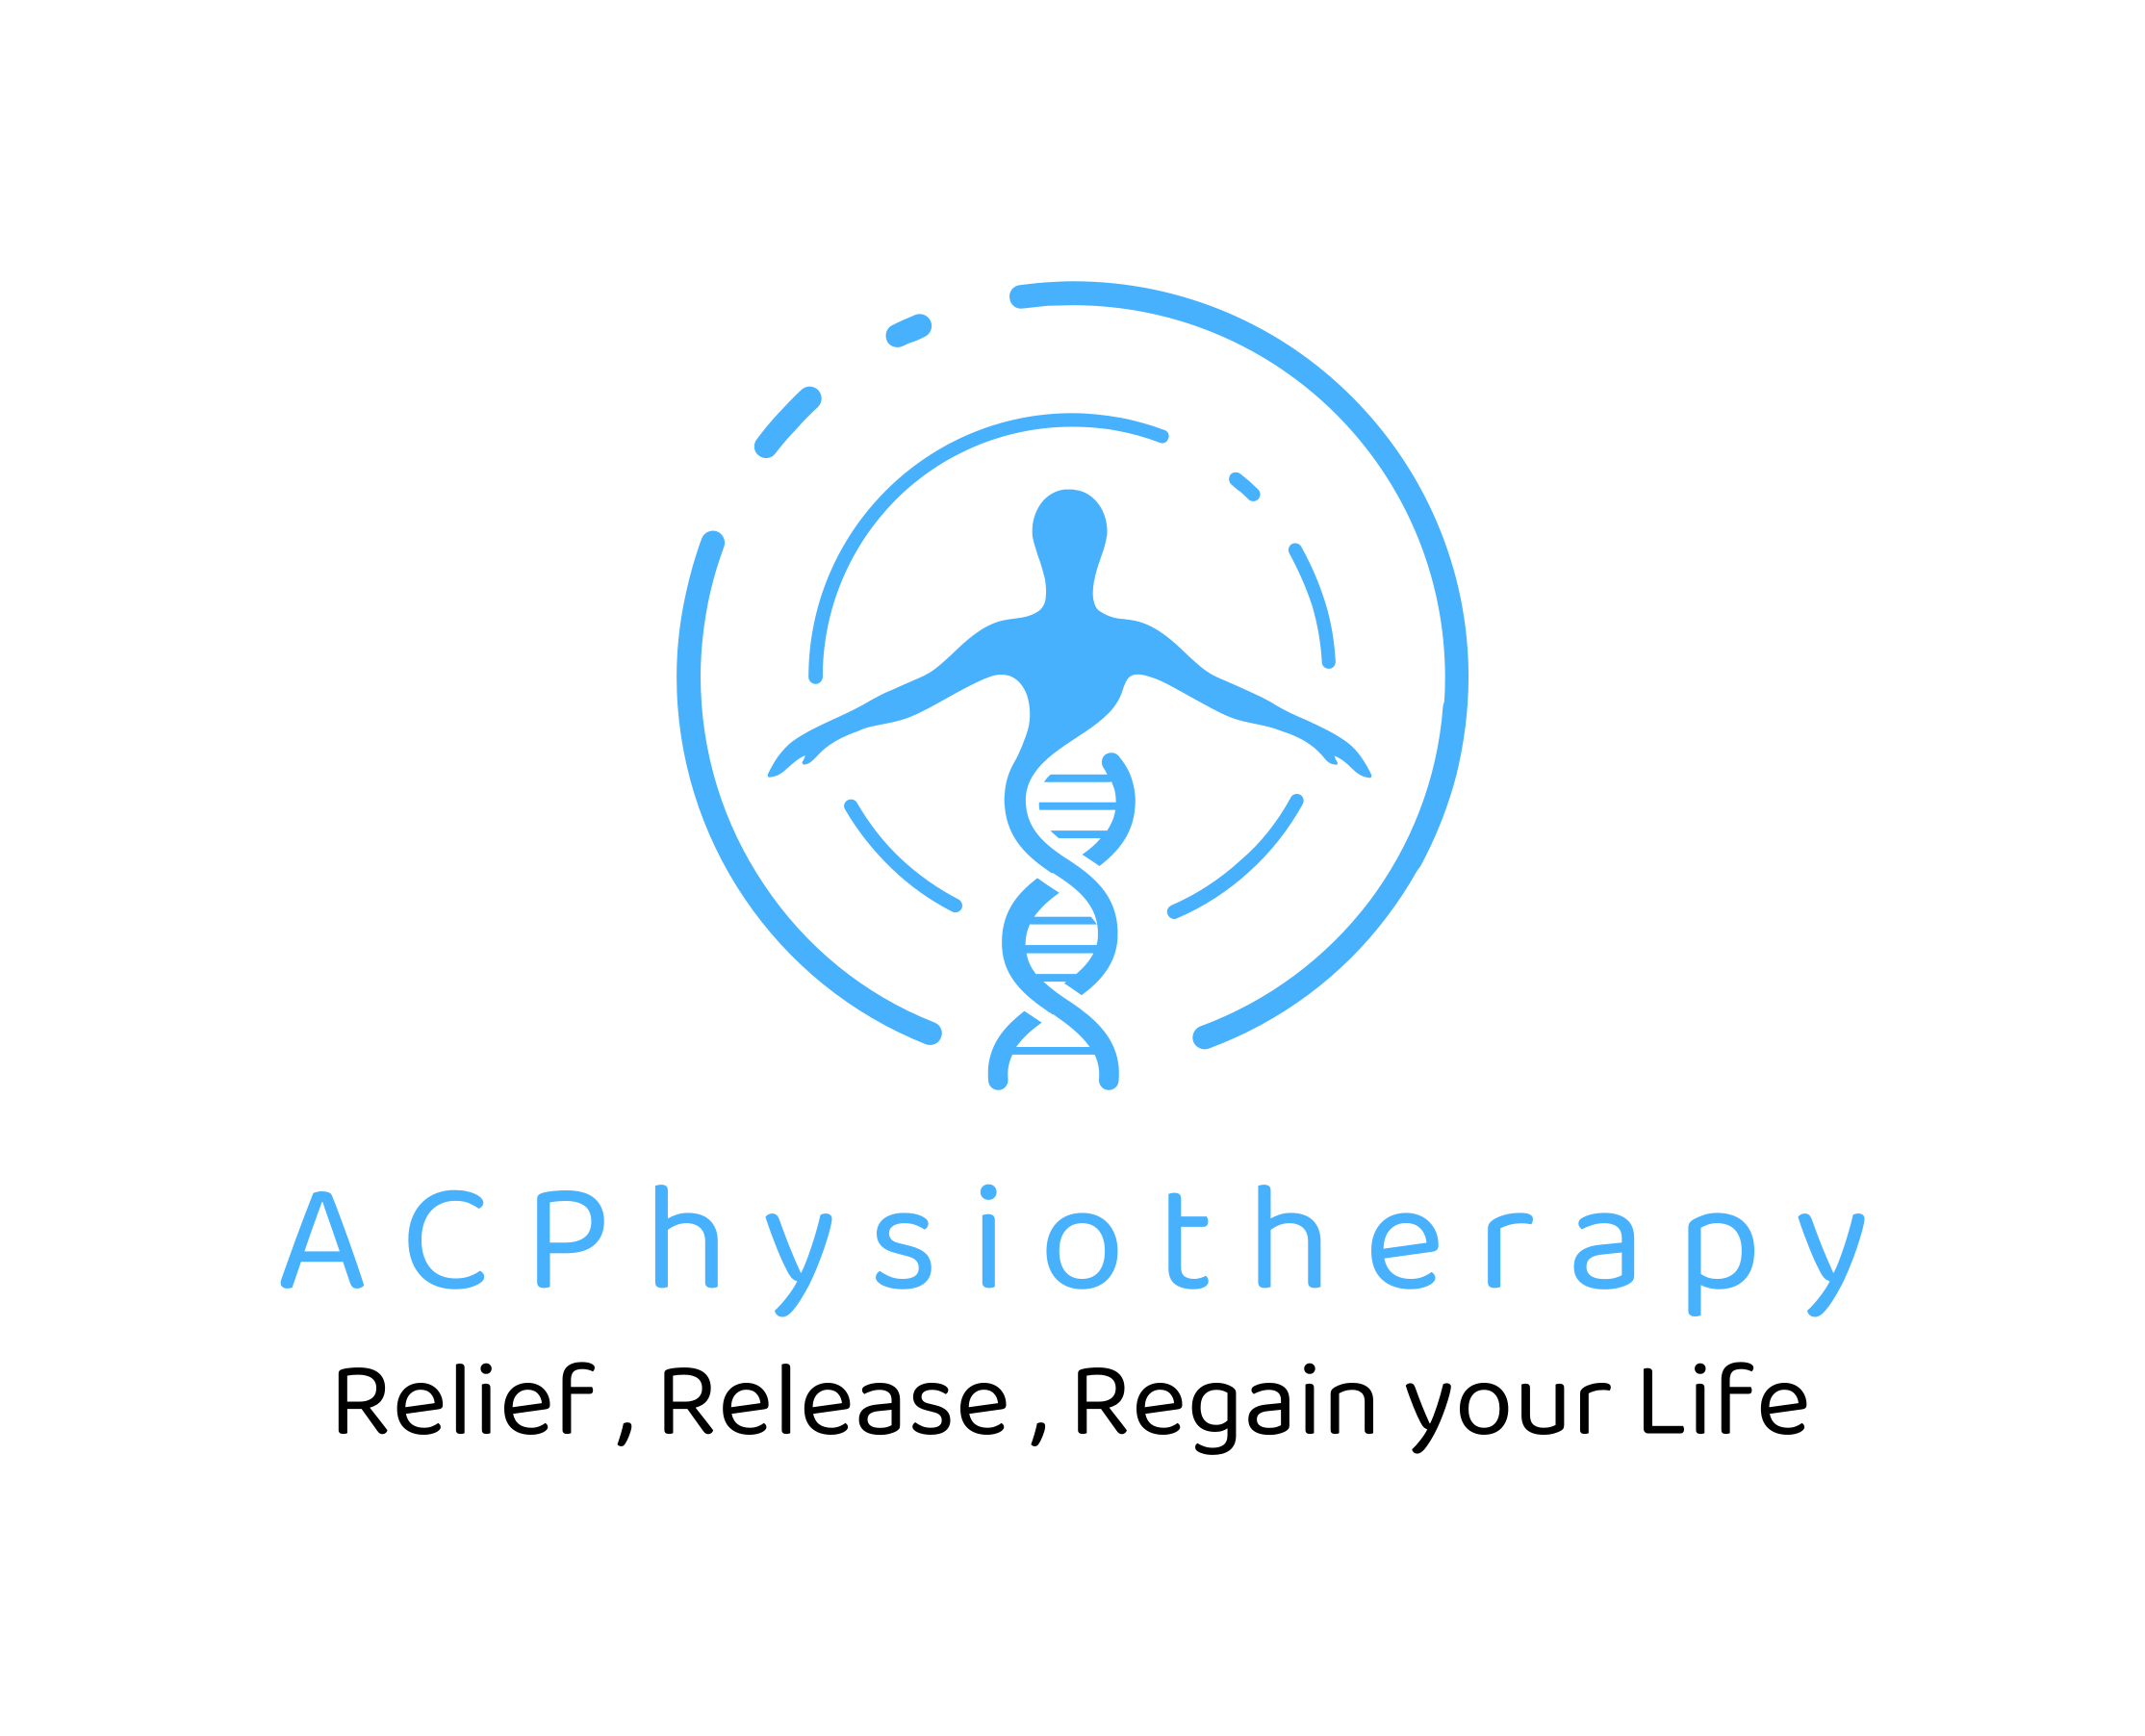 Logo of AC Physiotherapy Physiotherapists In Manchester, Lancashire